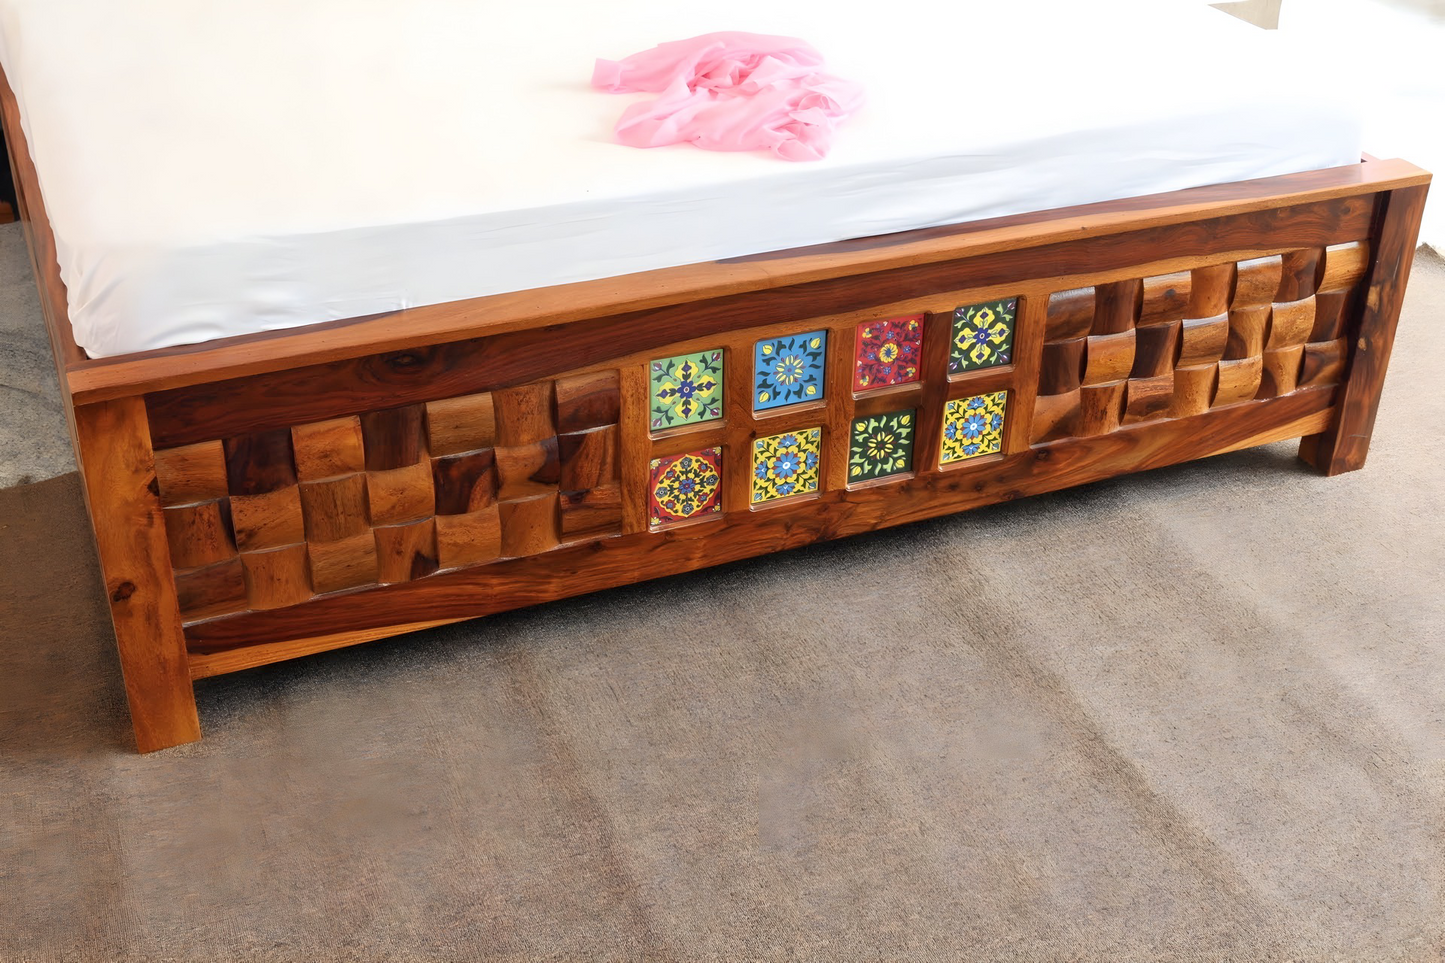 Transform your bedroom with our Tiles Solid Wood Storage Bed, made with sheesham wood and ceramic tiles. Buy wooden beds with storage in Bangalore today!